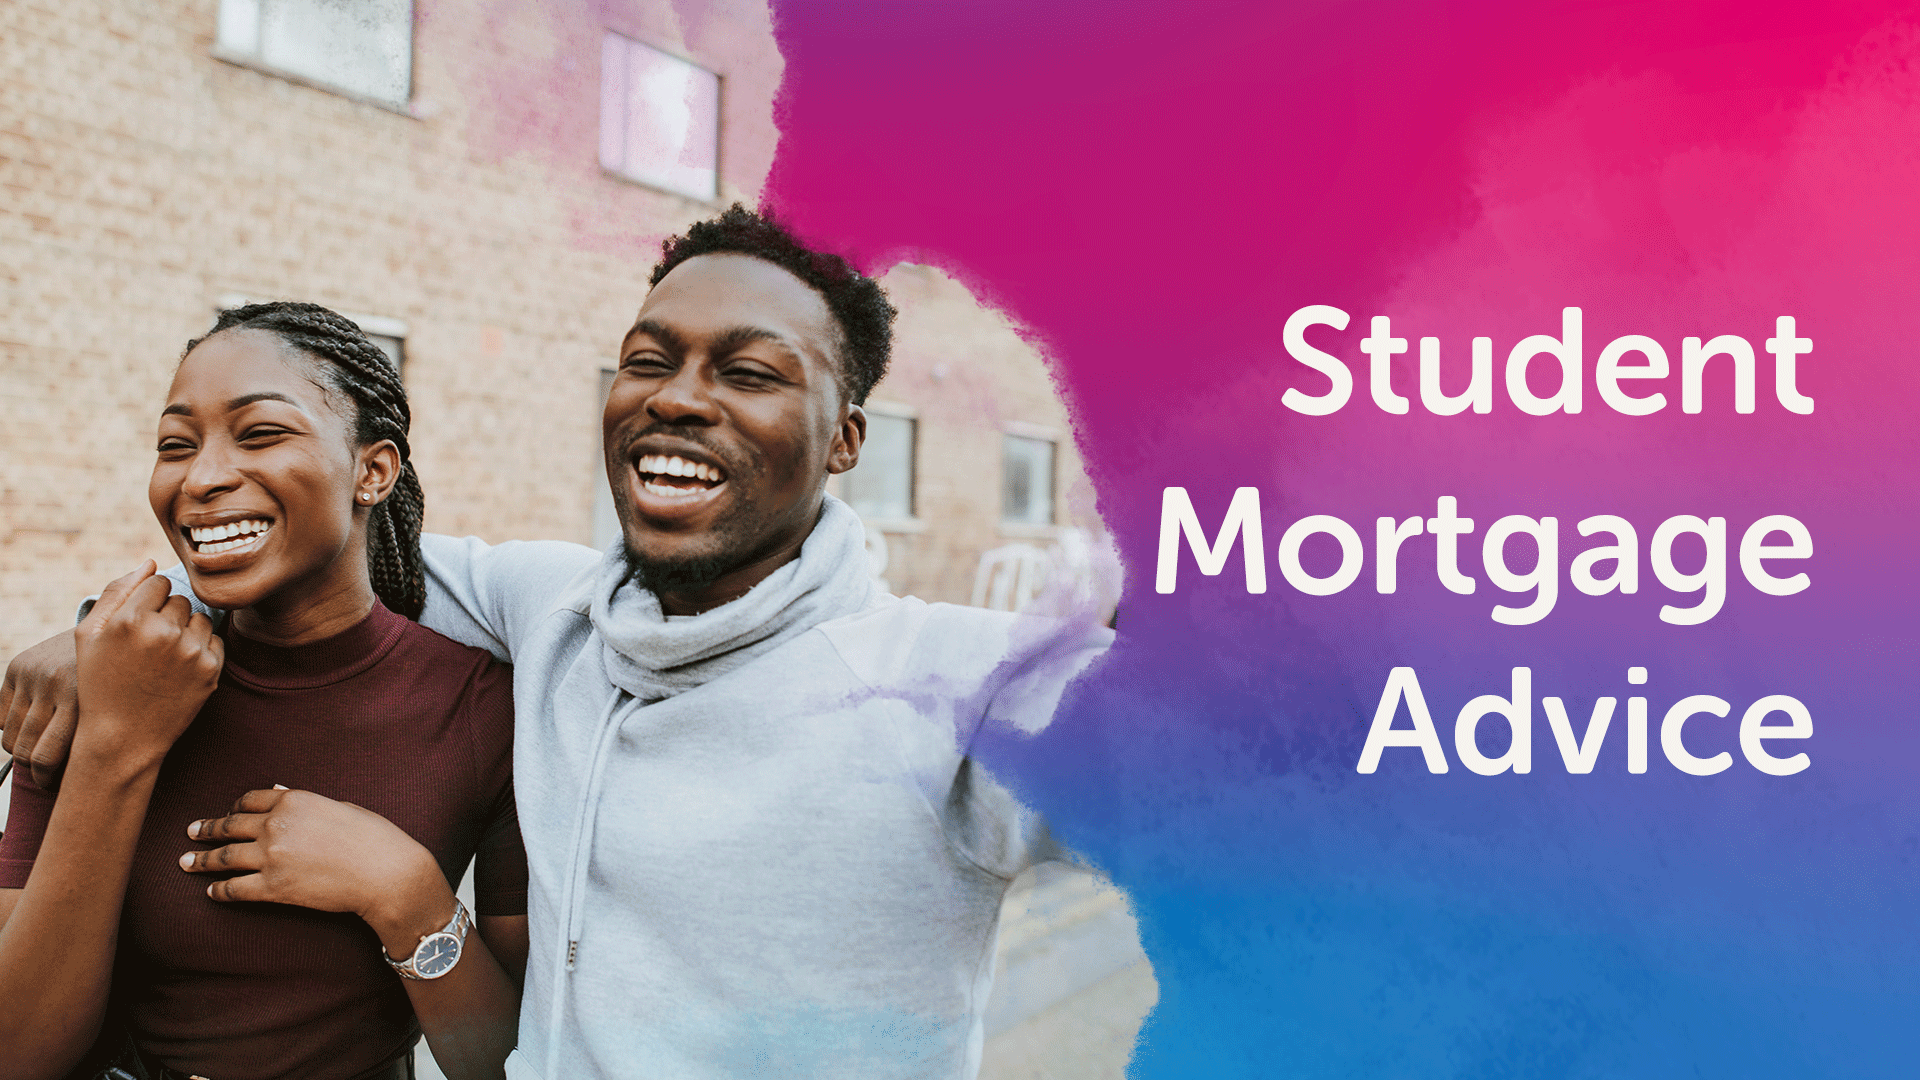 Can a Student Get a Mortgage in Sheffield?